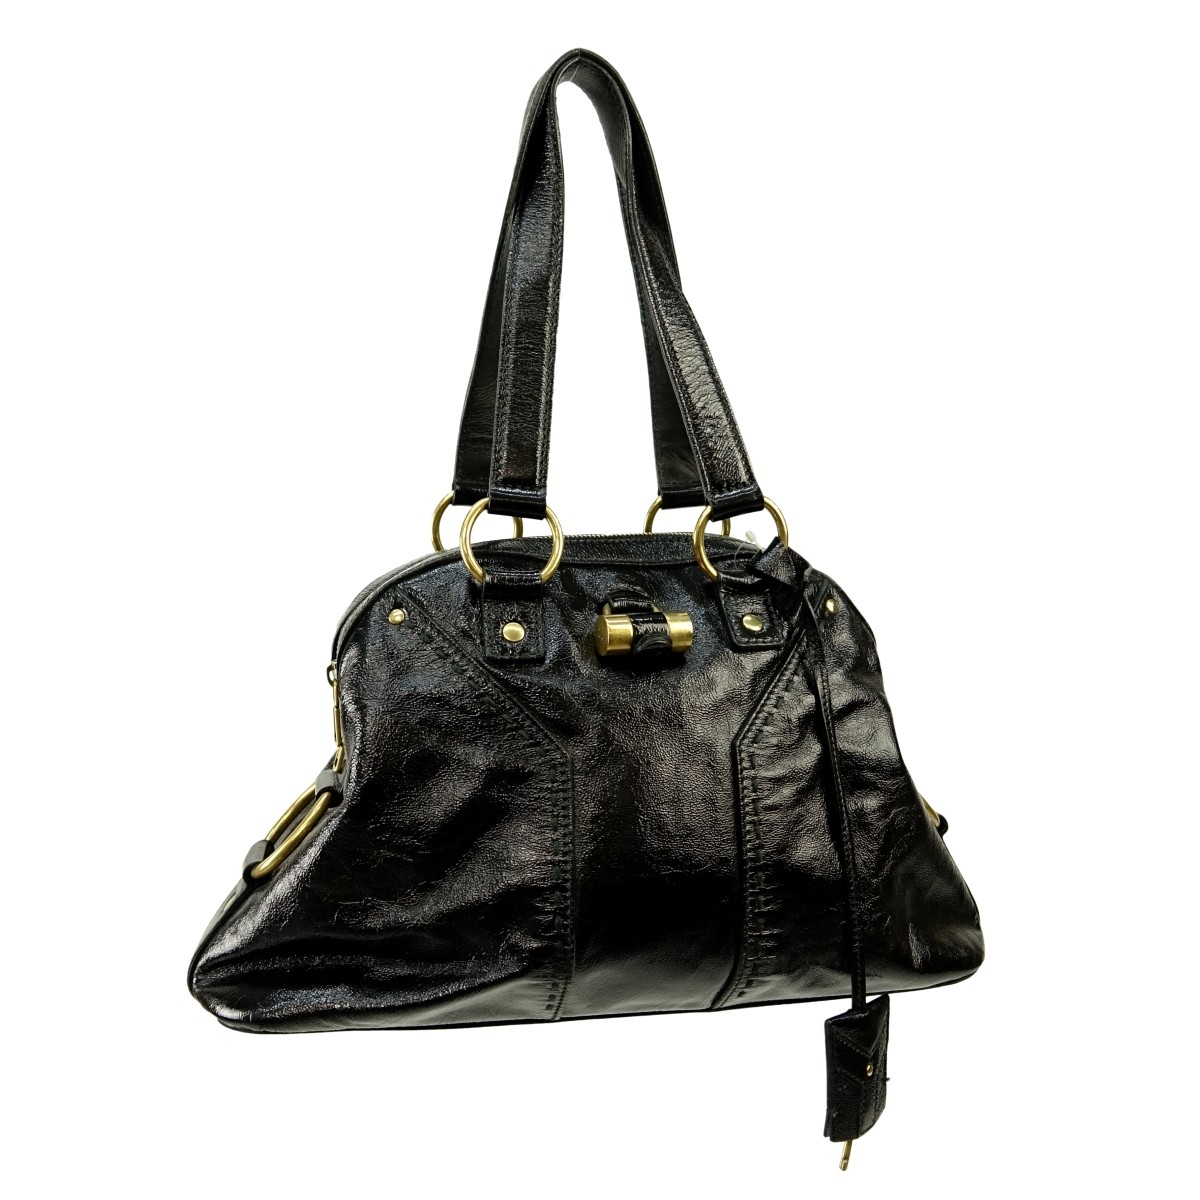 Yves St Laurent Black Patent Leather Muse 1 PM Bag